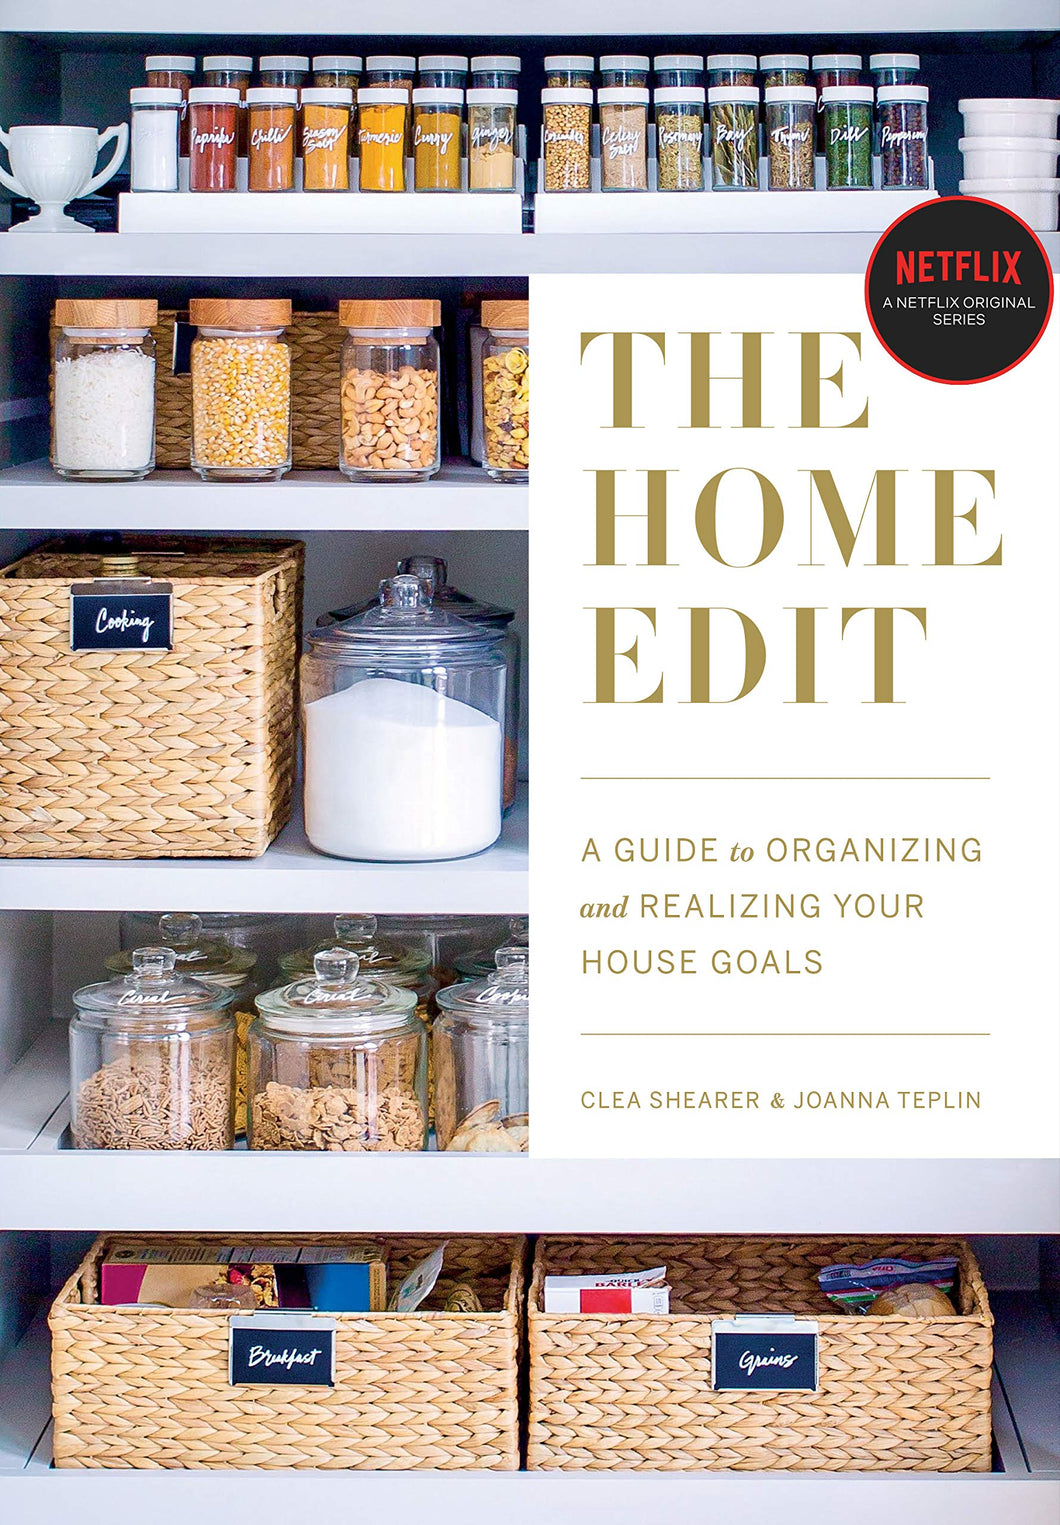 The Home Edit: A Guide to Organizing and Realizing Your House Goals [Clea Shearer & Joanna Teplin]